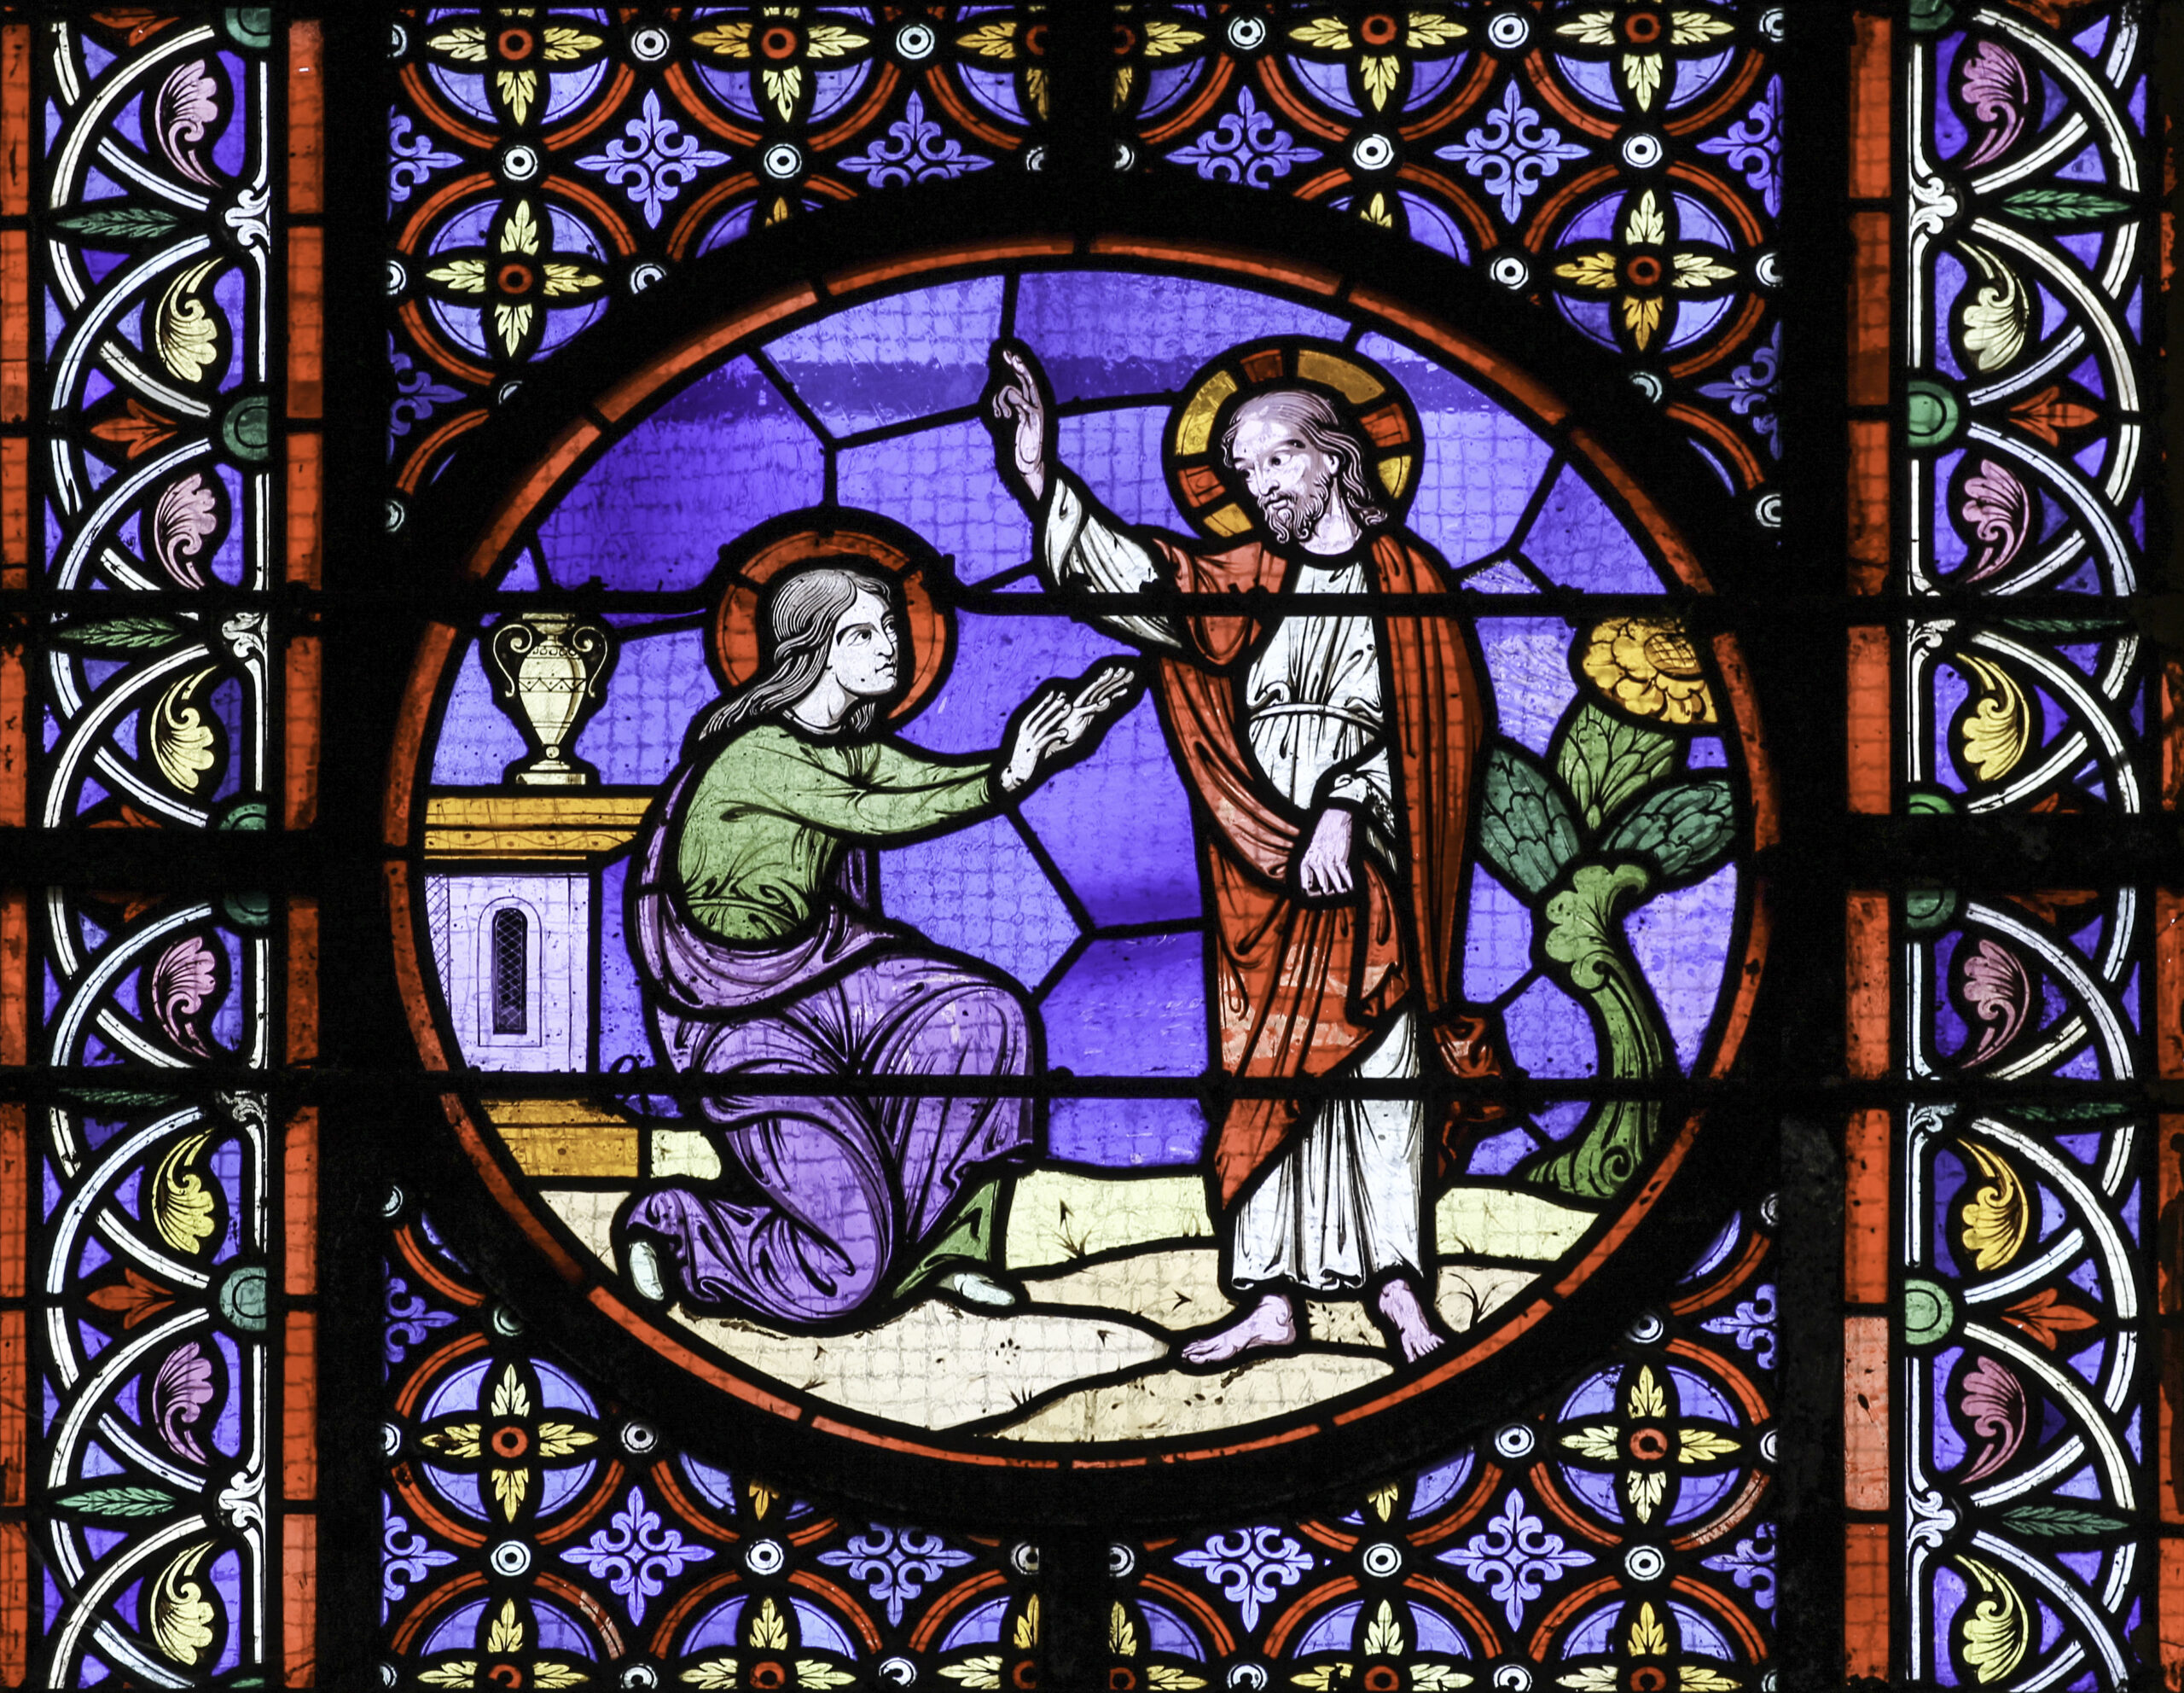 Stained glass window depicting Resurrection scene